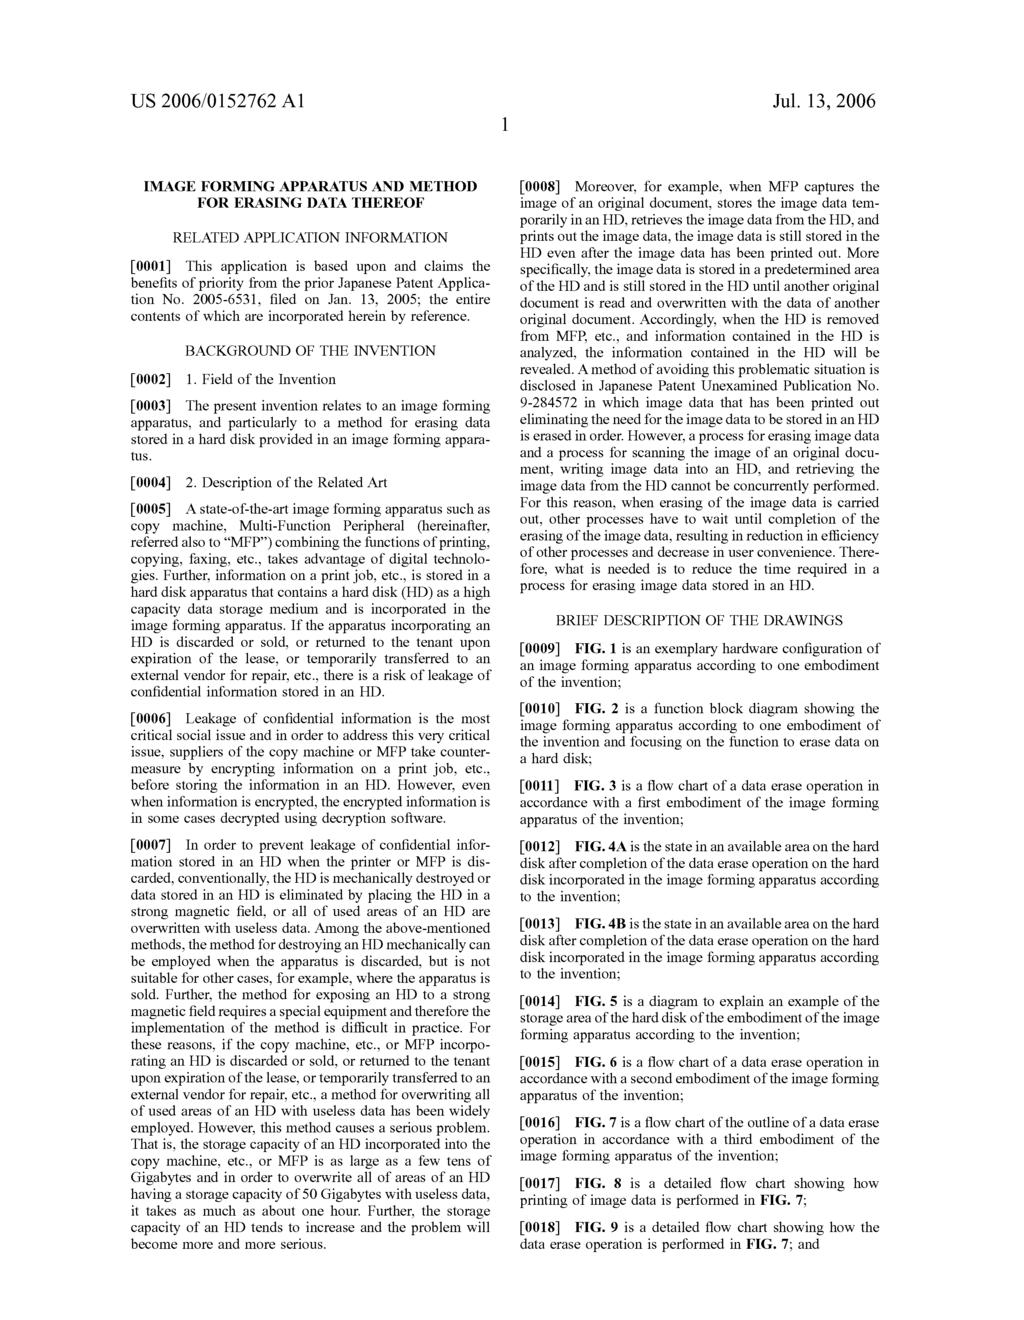 US 2006/01527.62 A1 Jul. 13, 2006 IMAGE FORMING APPARATUS AND METHOD FOR ERASING DATA THEREOF RELATED APPLICATION INFORMATION 0001.